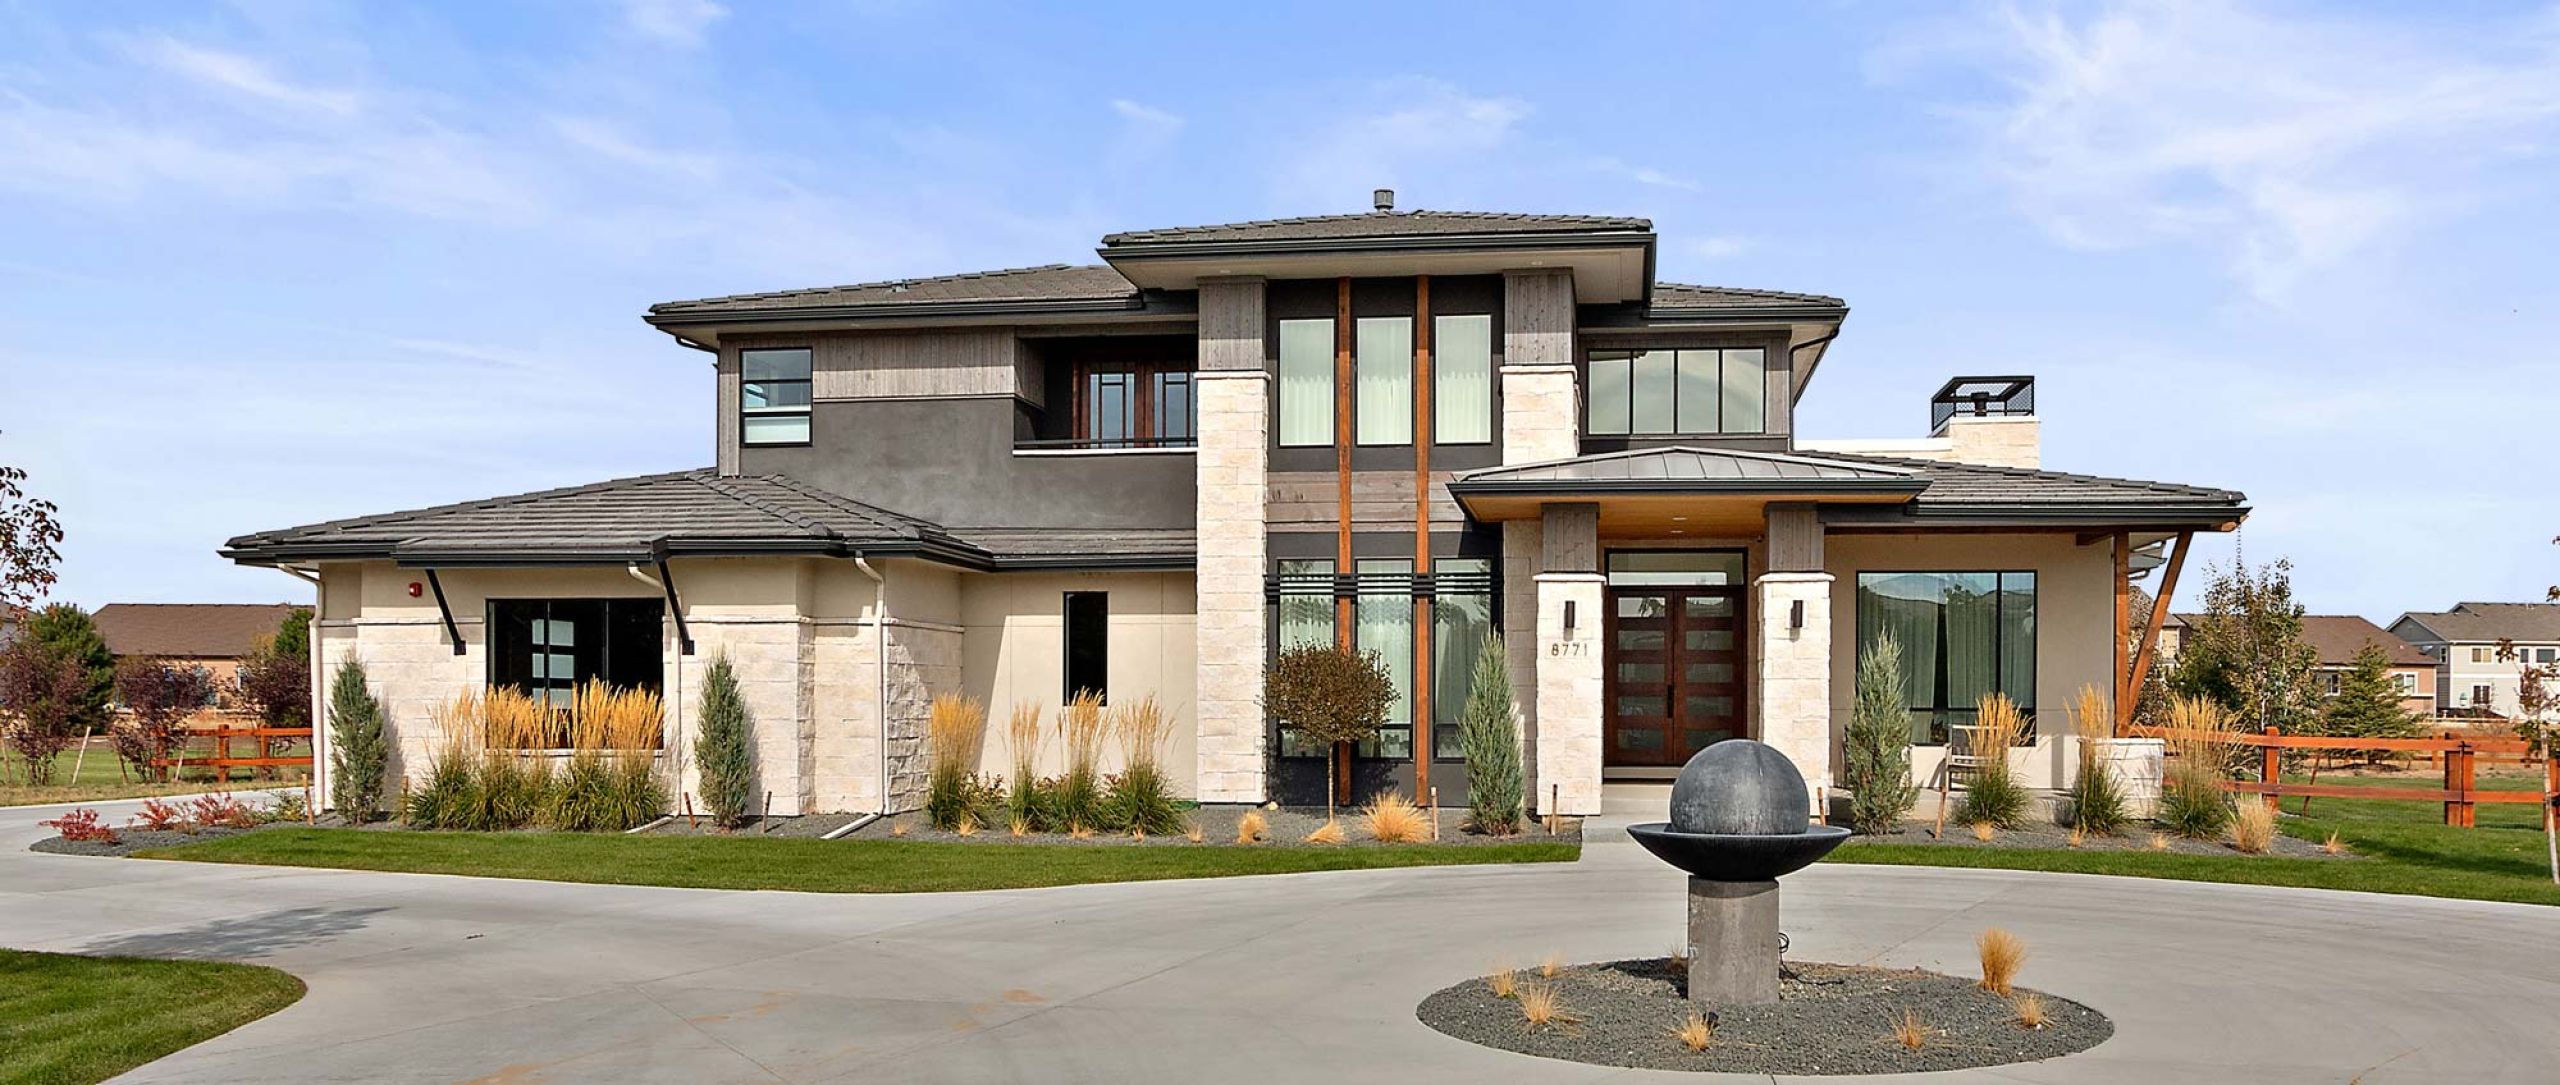 Exterior of custom home by Sopris Homes